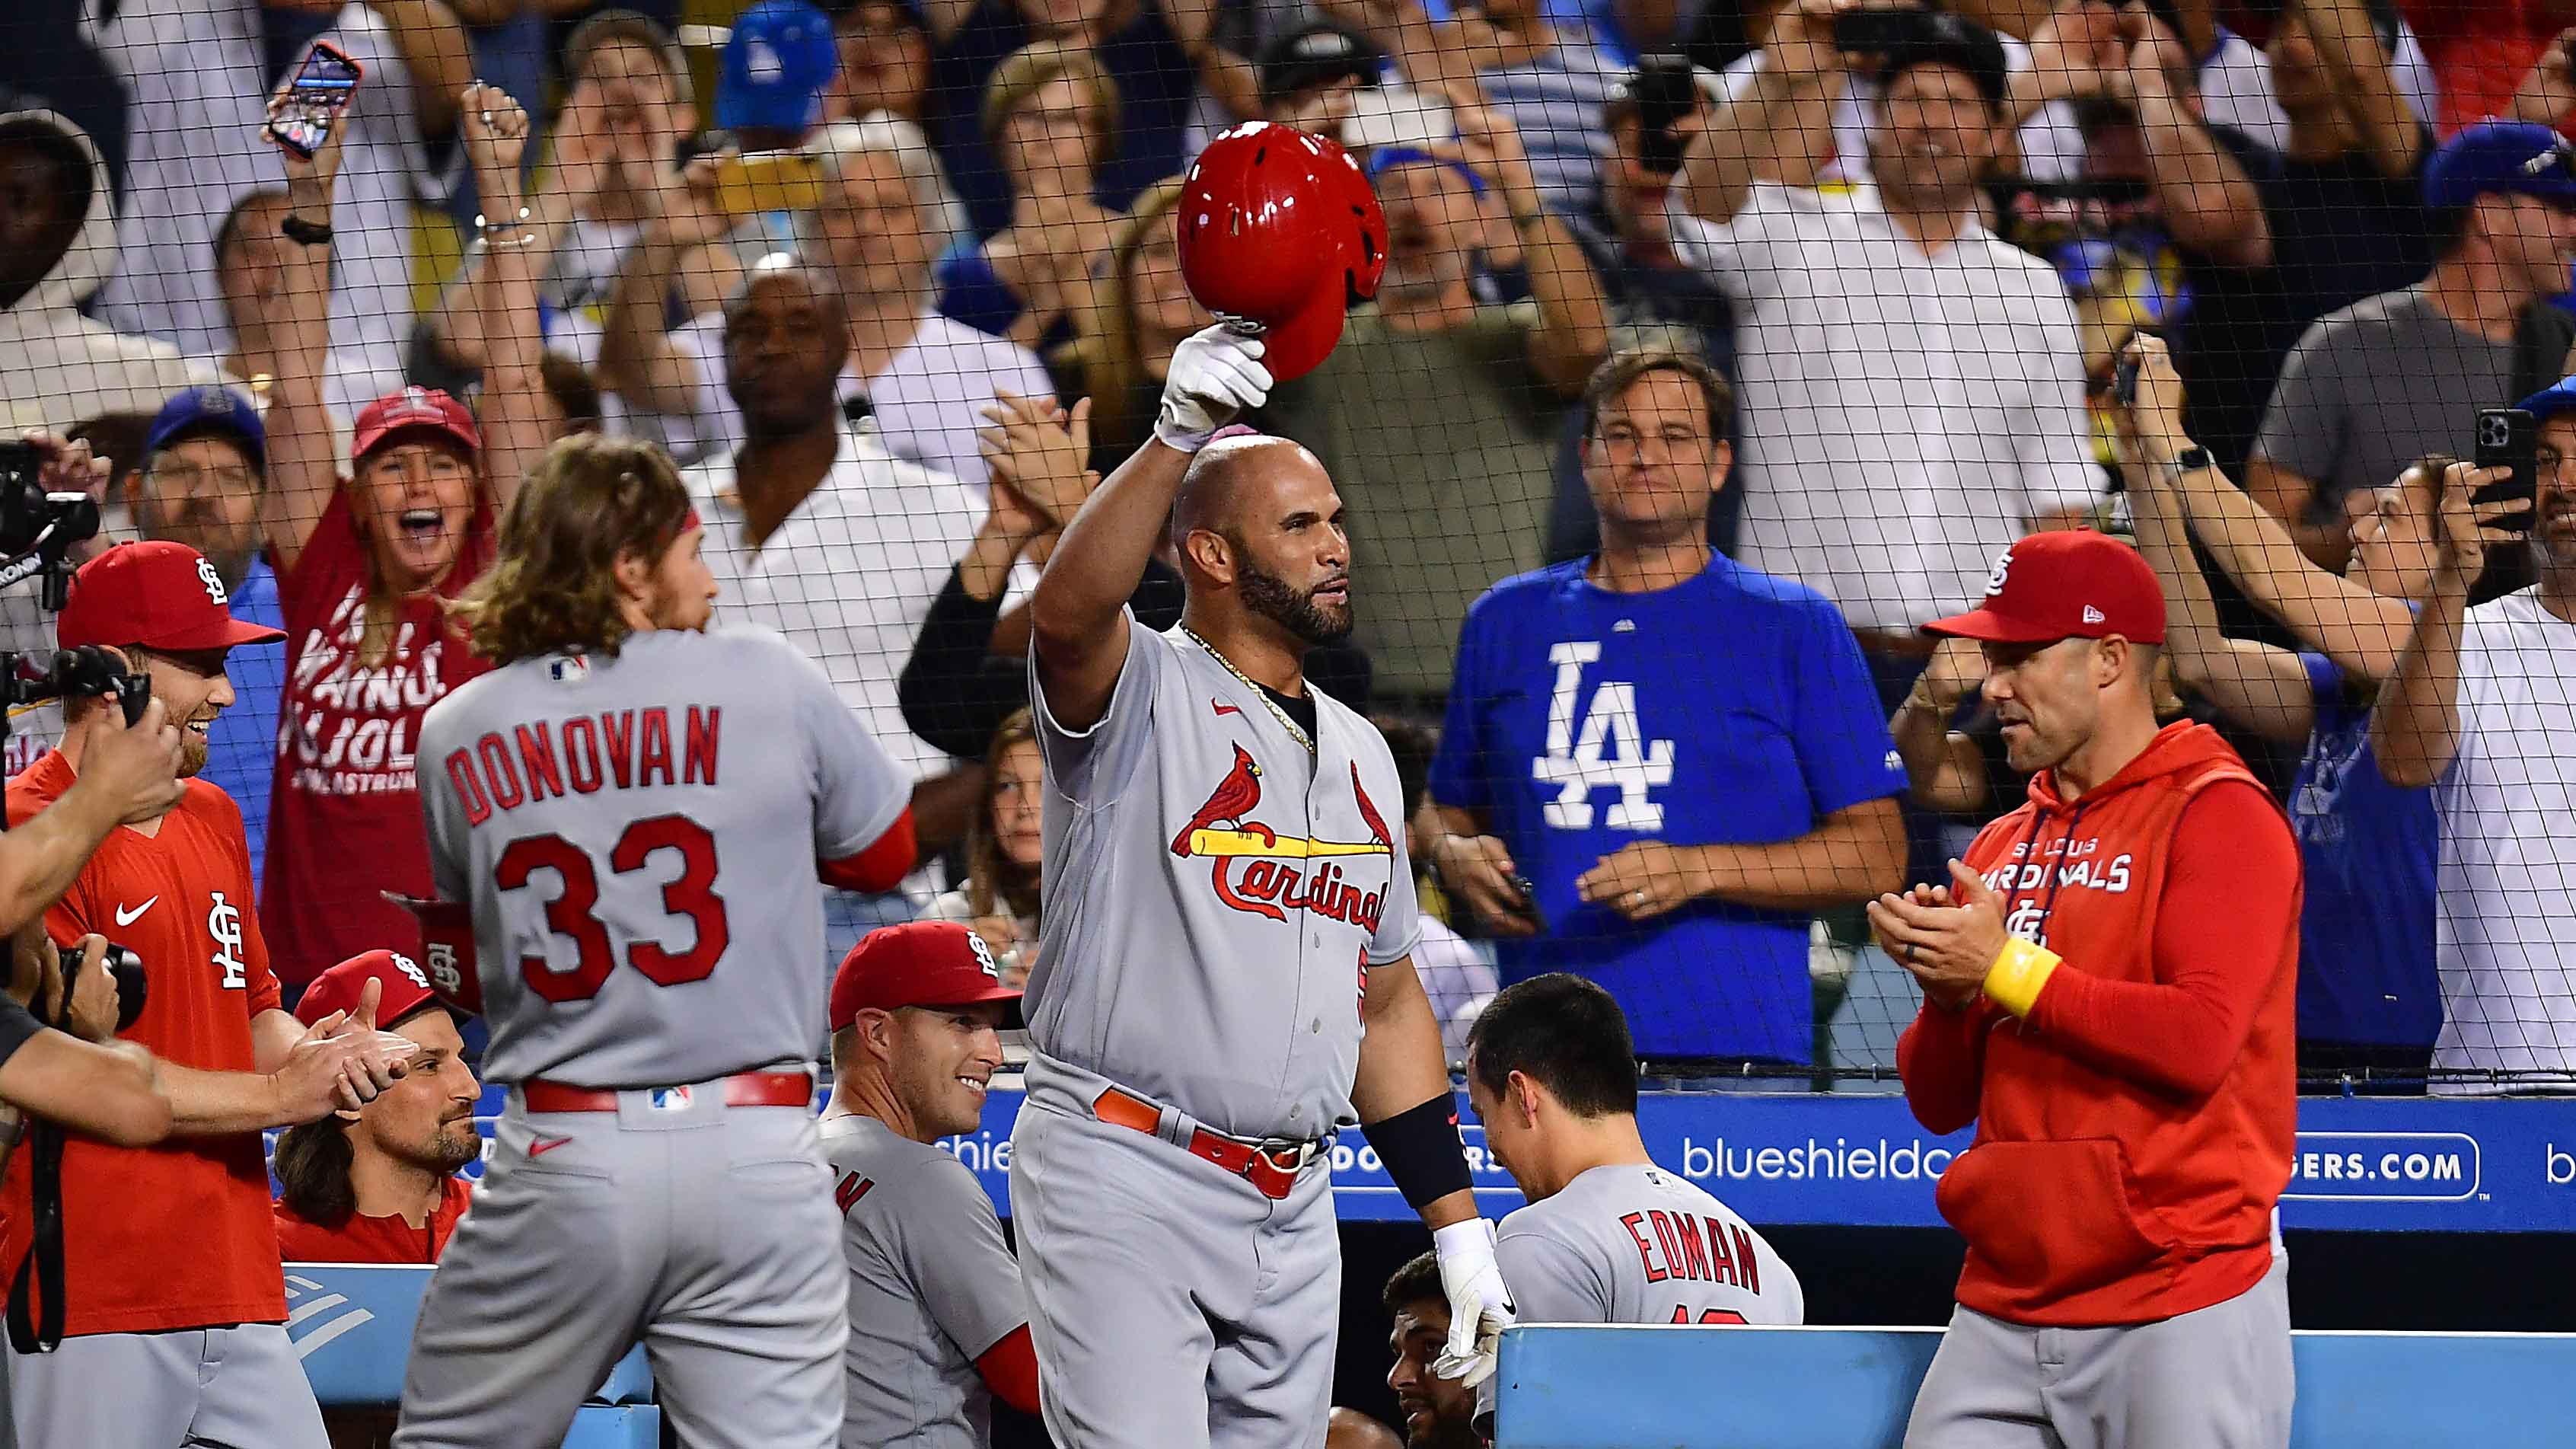 St. Louis Cardinals' Albert Pujols on the road to 700 HRs